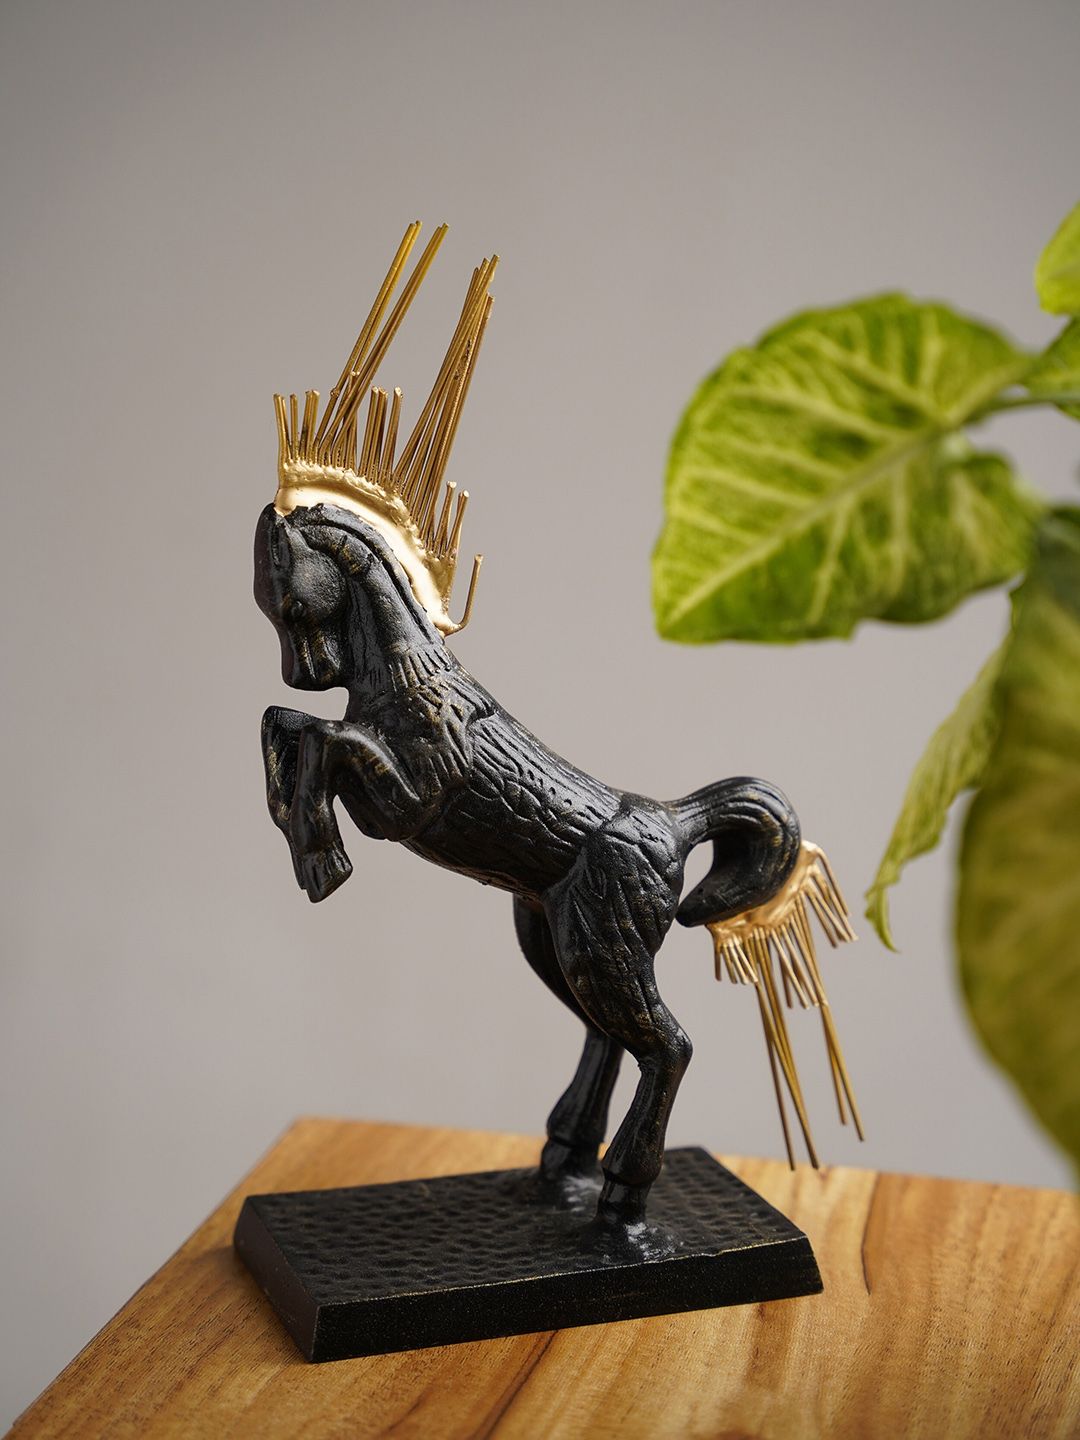 Folkstorys Black & Gold-Toned Metal Horse Figurine Price in India